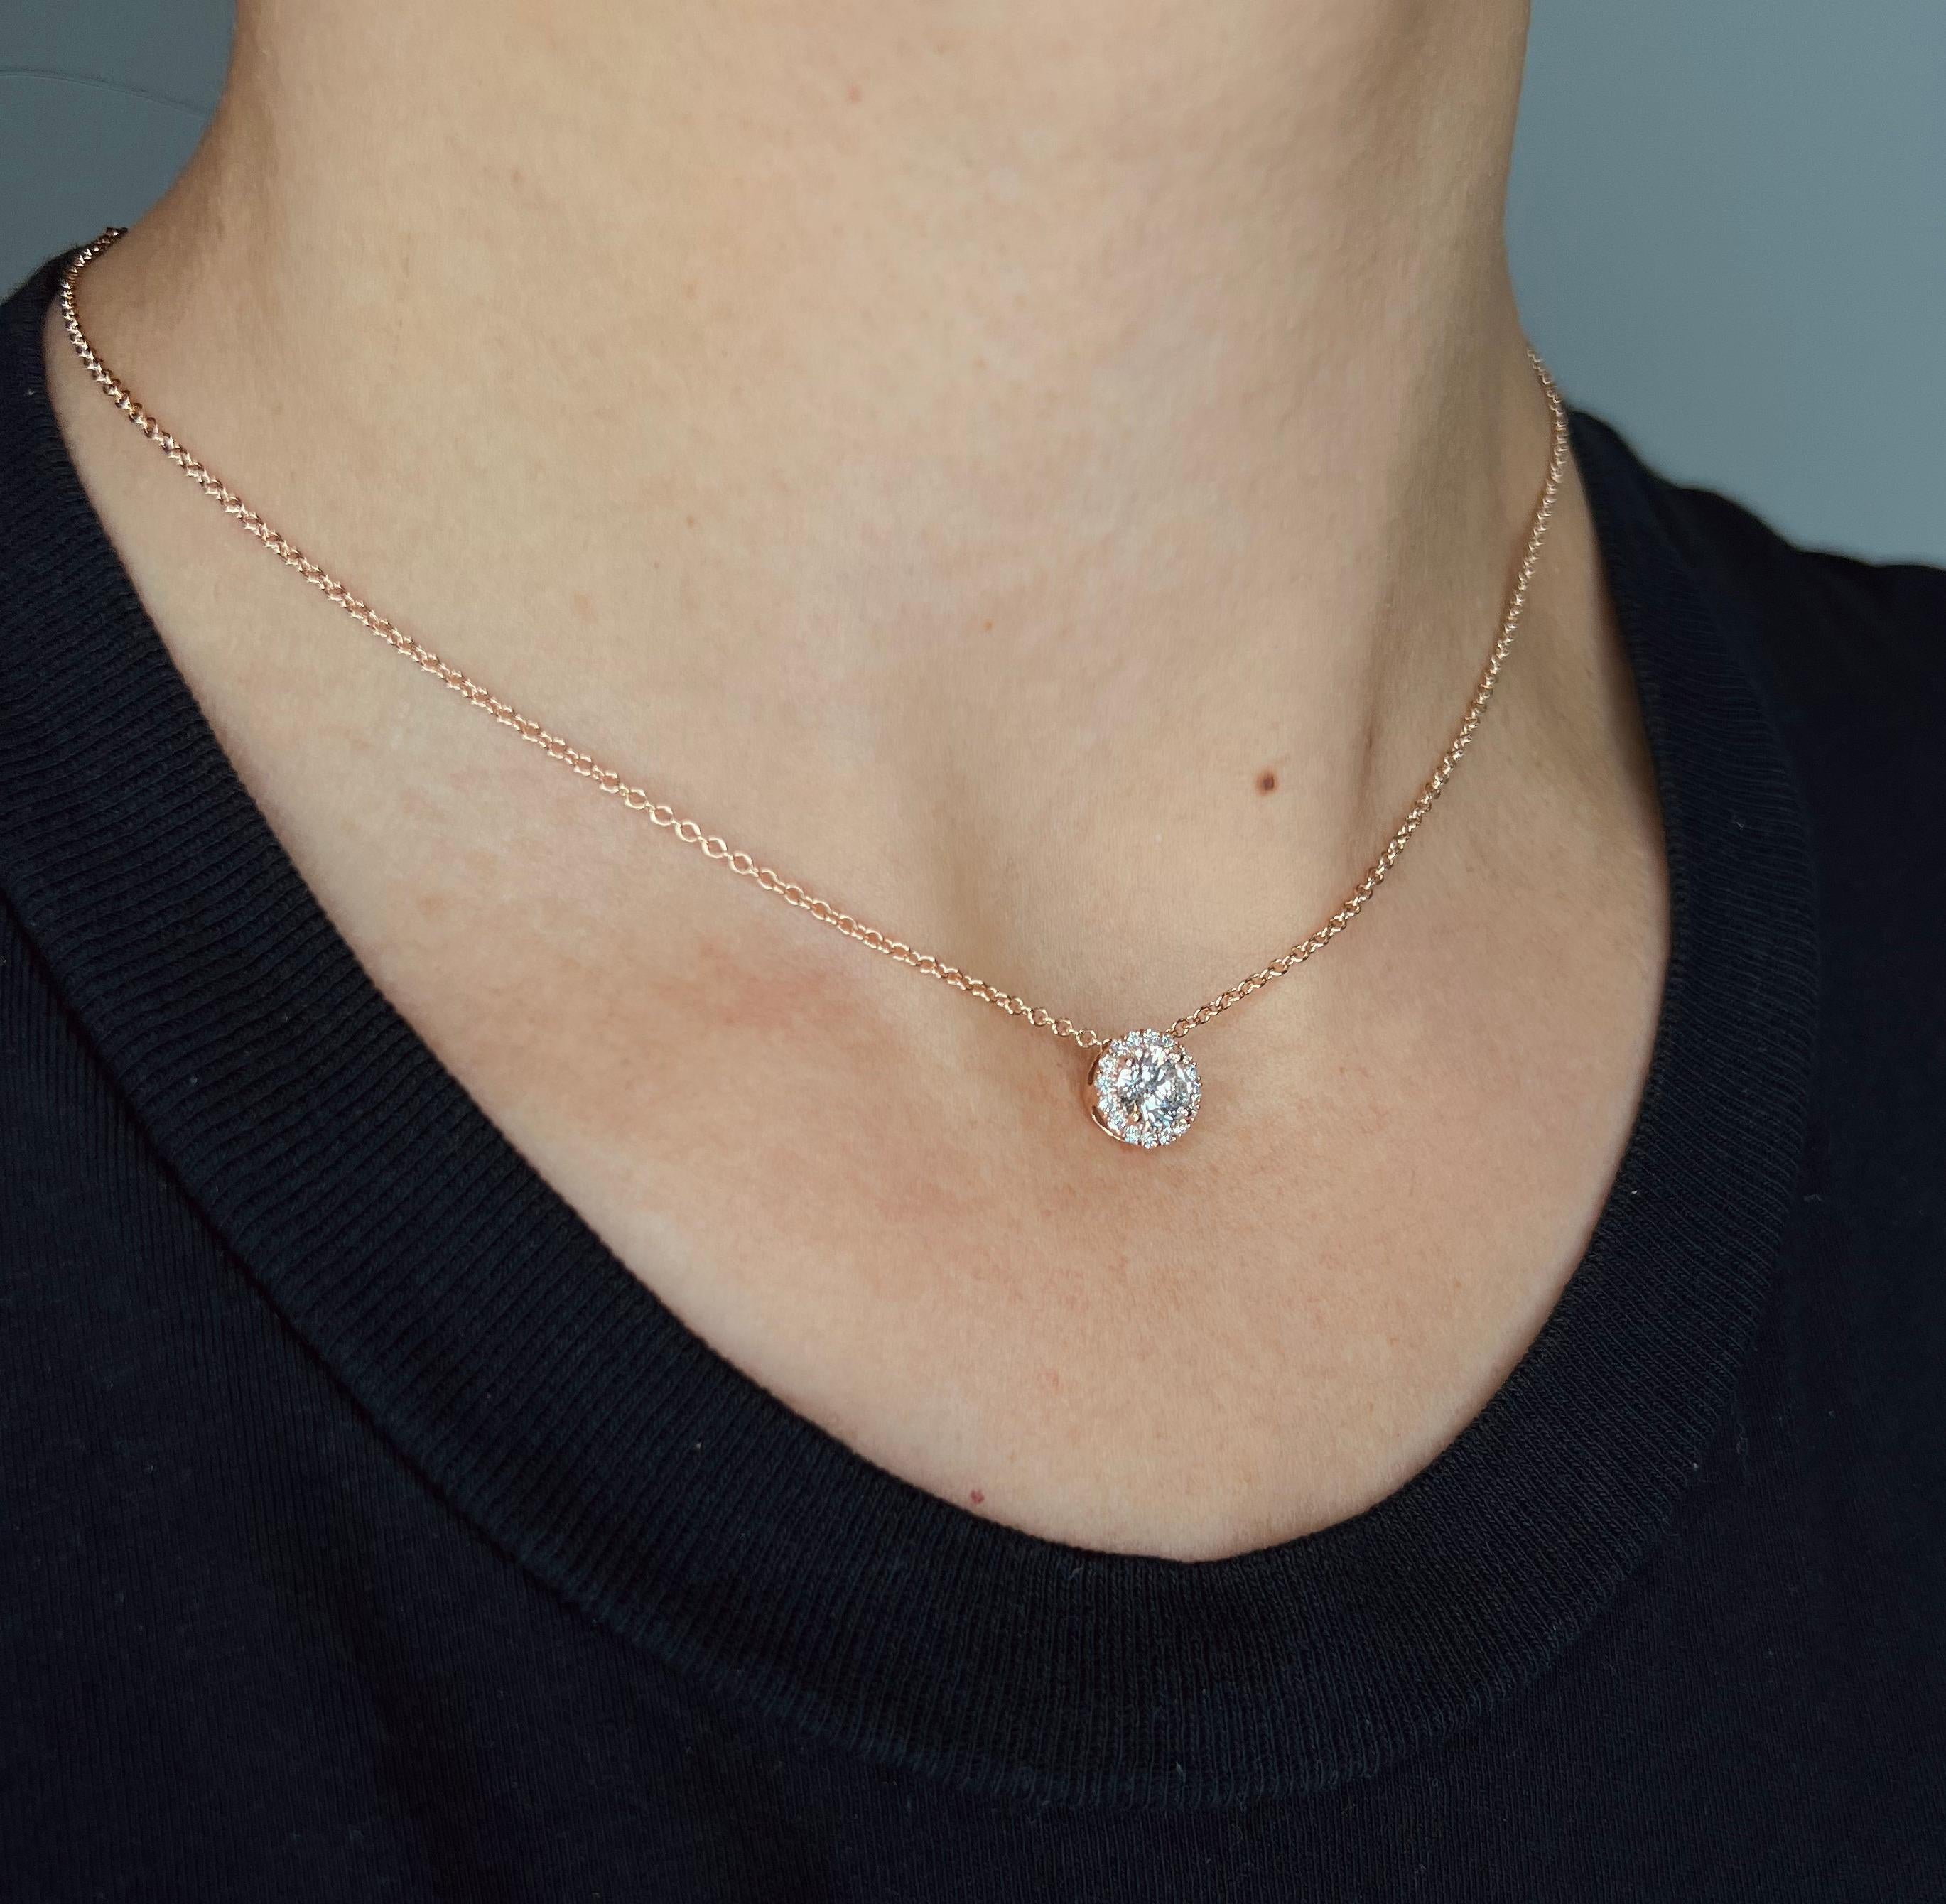 This diamond circle pendant provides a glowing chic look.
Metal: 14k Gold
Diamond Total Carats (Includes 0.15ct halo): 0.40 Total (.25ct Center
Diamond Cut: Round Natural Diamonds (Not Lab Grown)
Diamond Clarity: VS
Diamond Color: F-G
Color: White